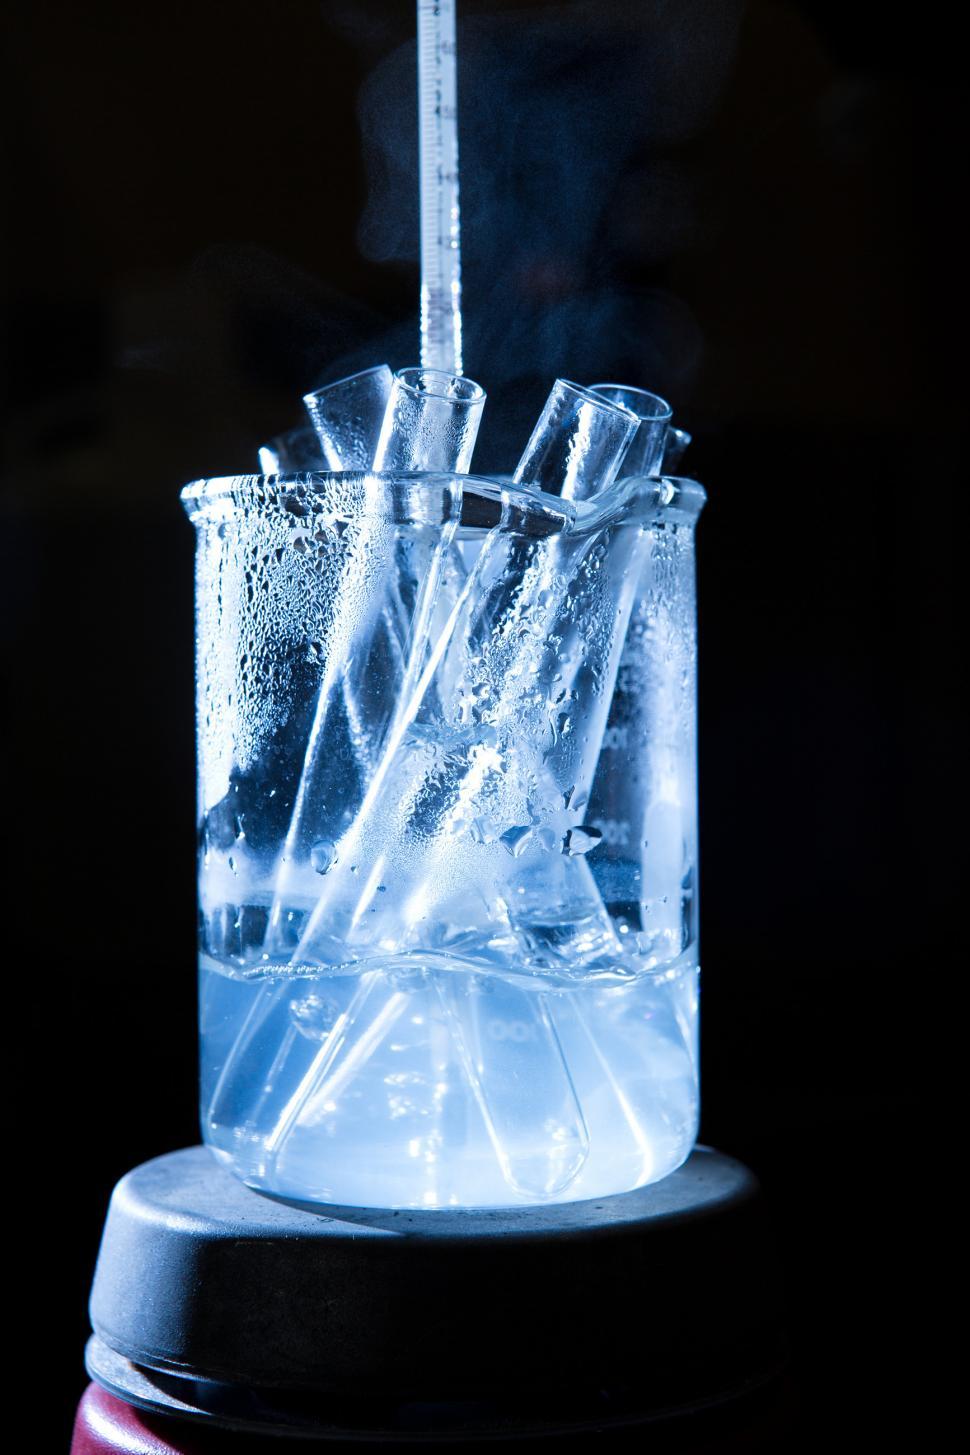 Free Image of Test Tube in a Beaker on a Hot Plate 